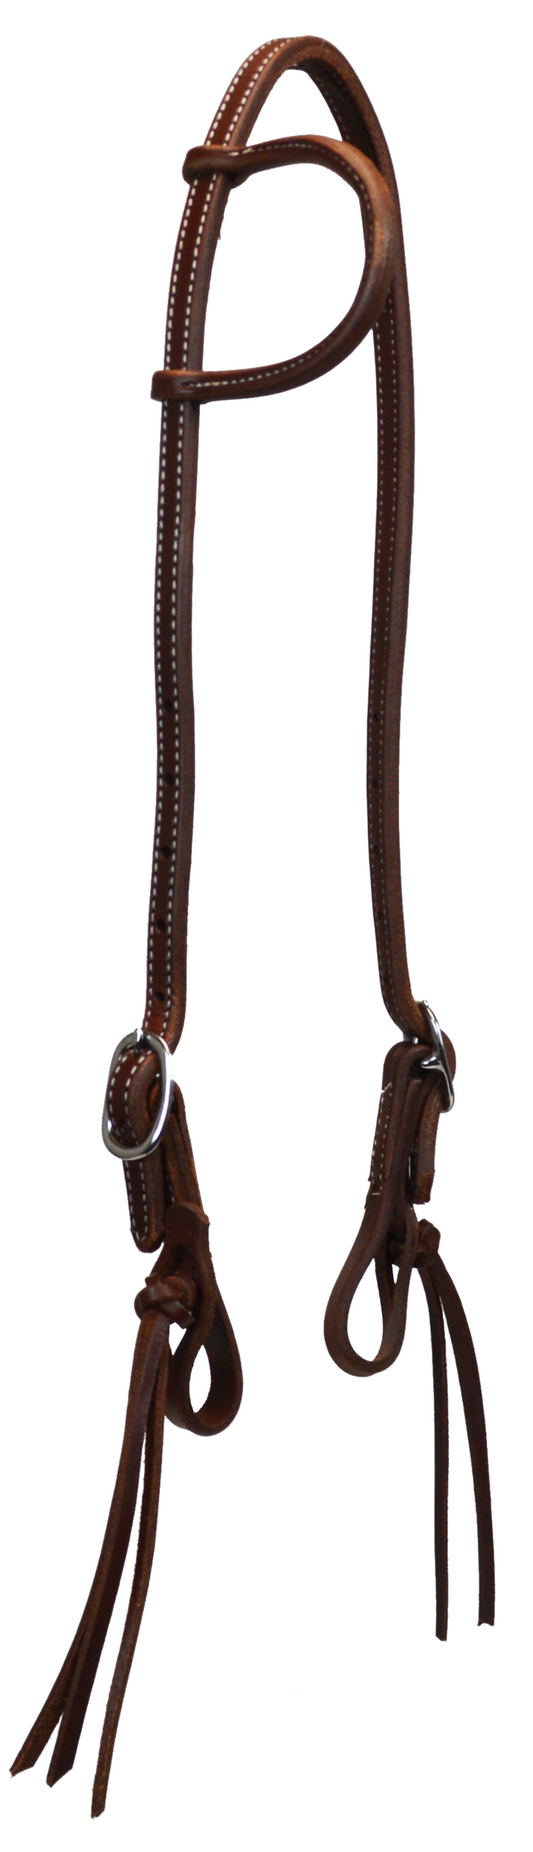 5/8" DOUBLED AND STITCHED SLIP EAR HEADSTALL (PINEAPPLE KNOT) HDST32